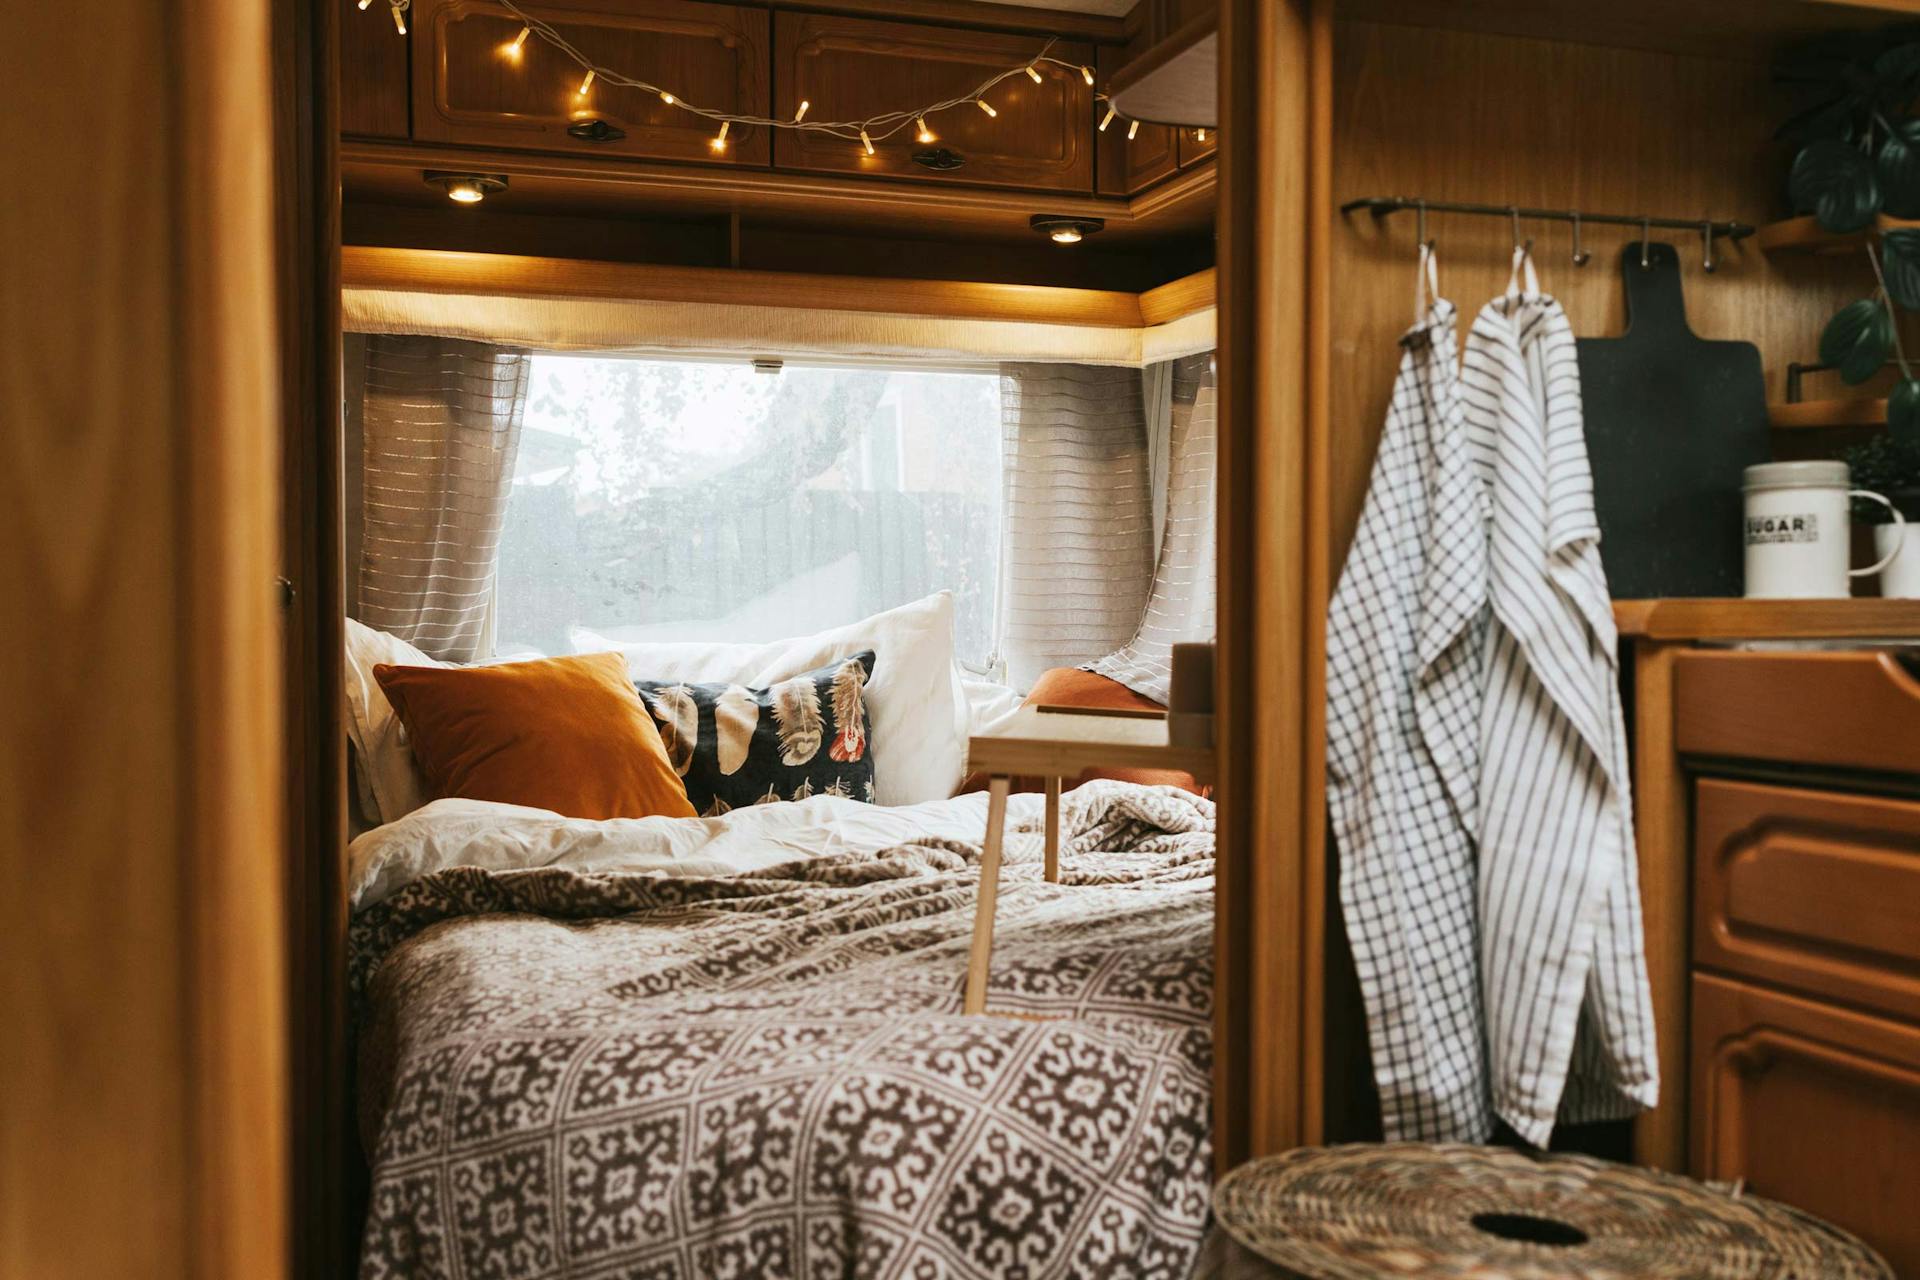 RV Makeover Ideas for Your Next DIY Project